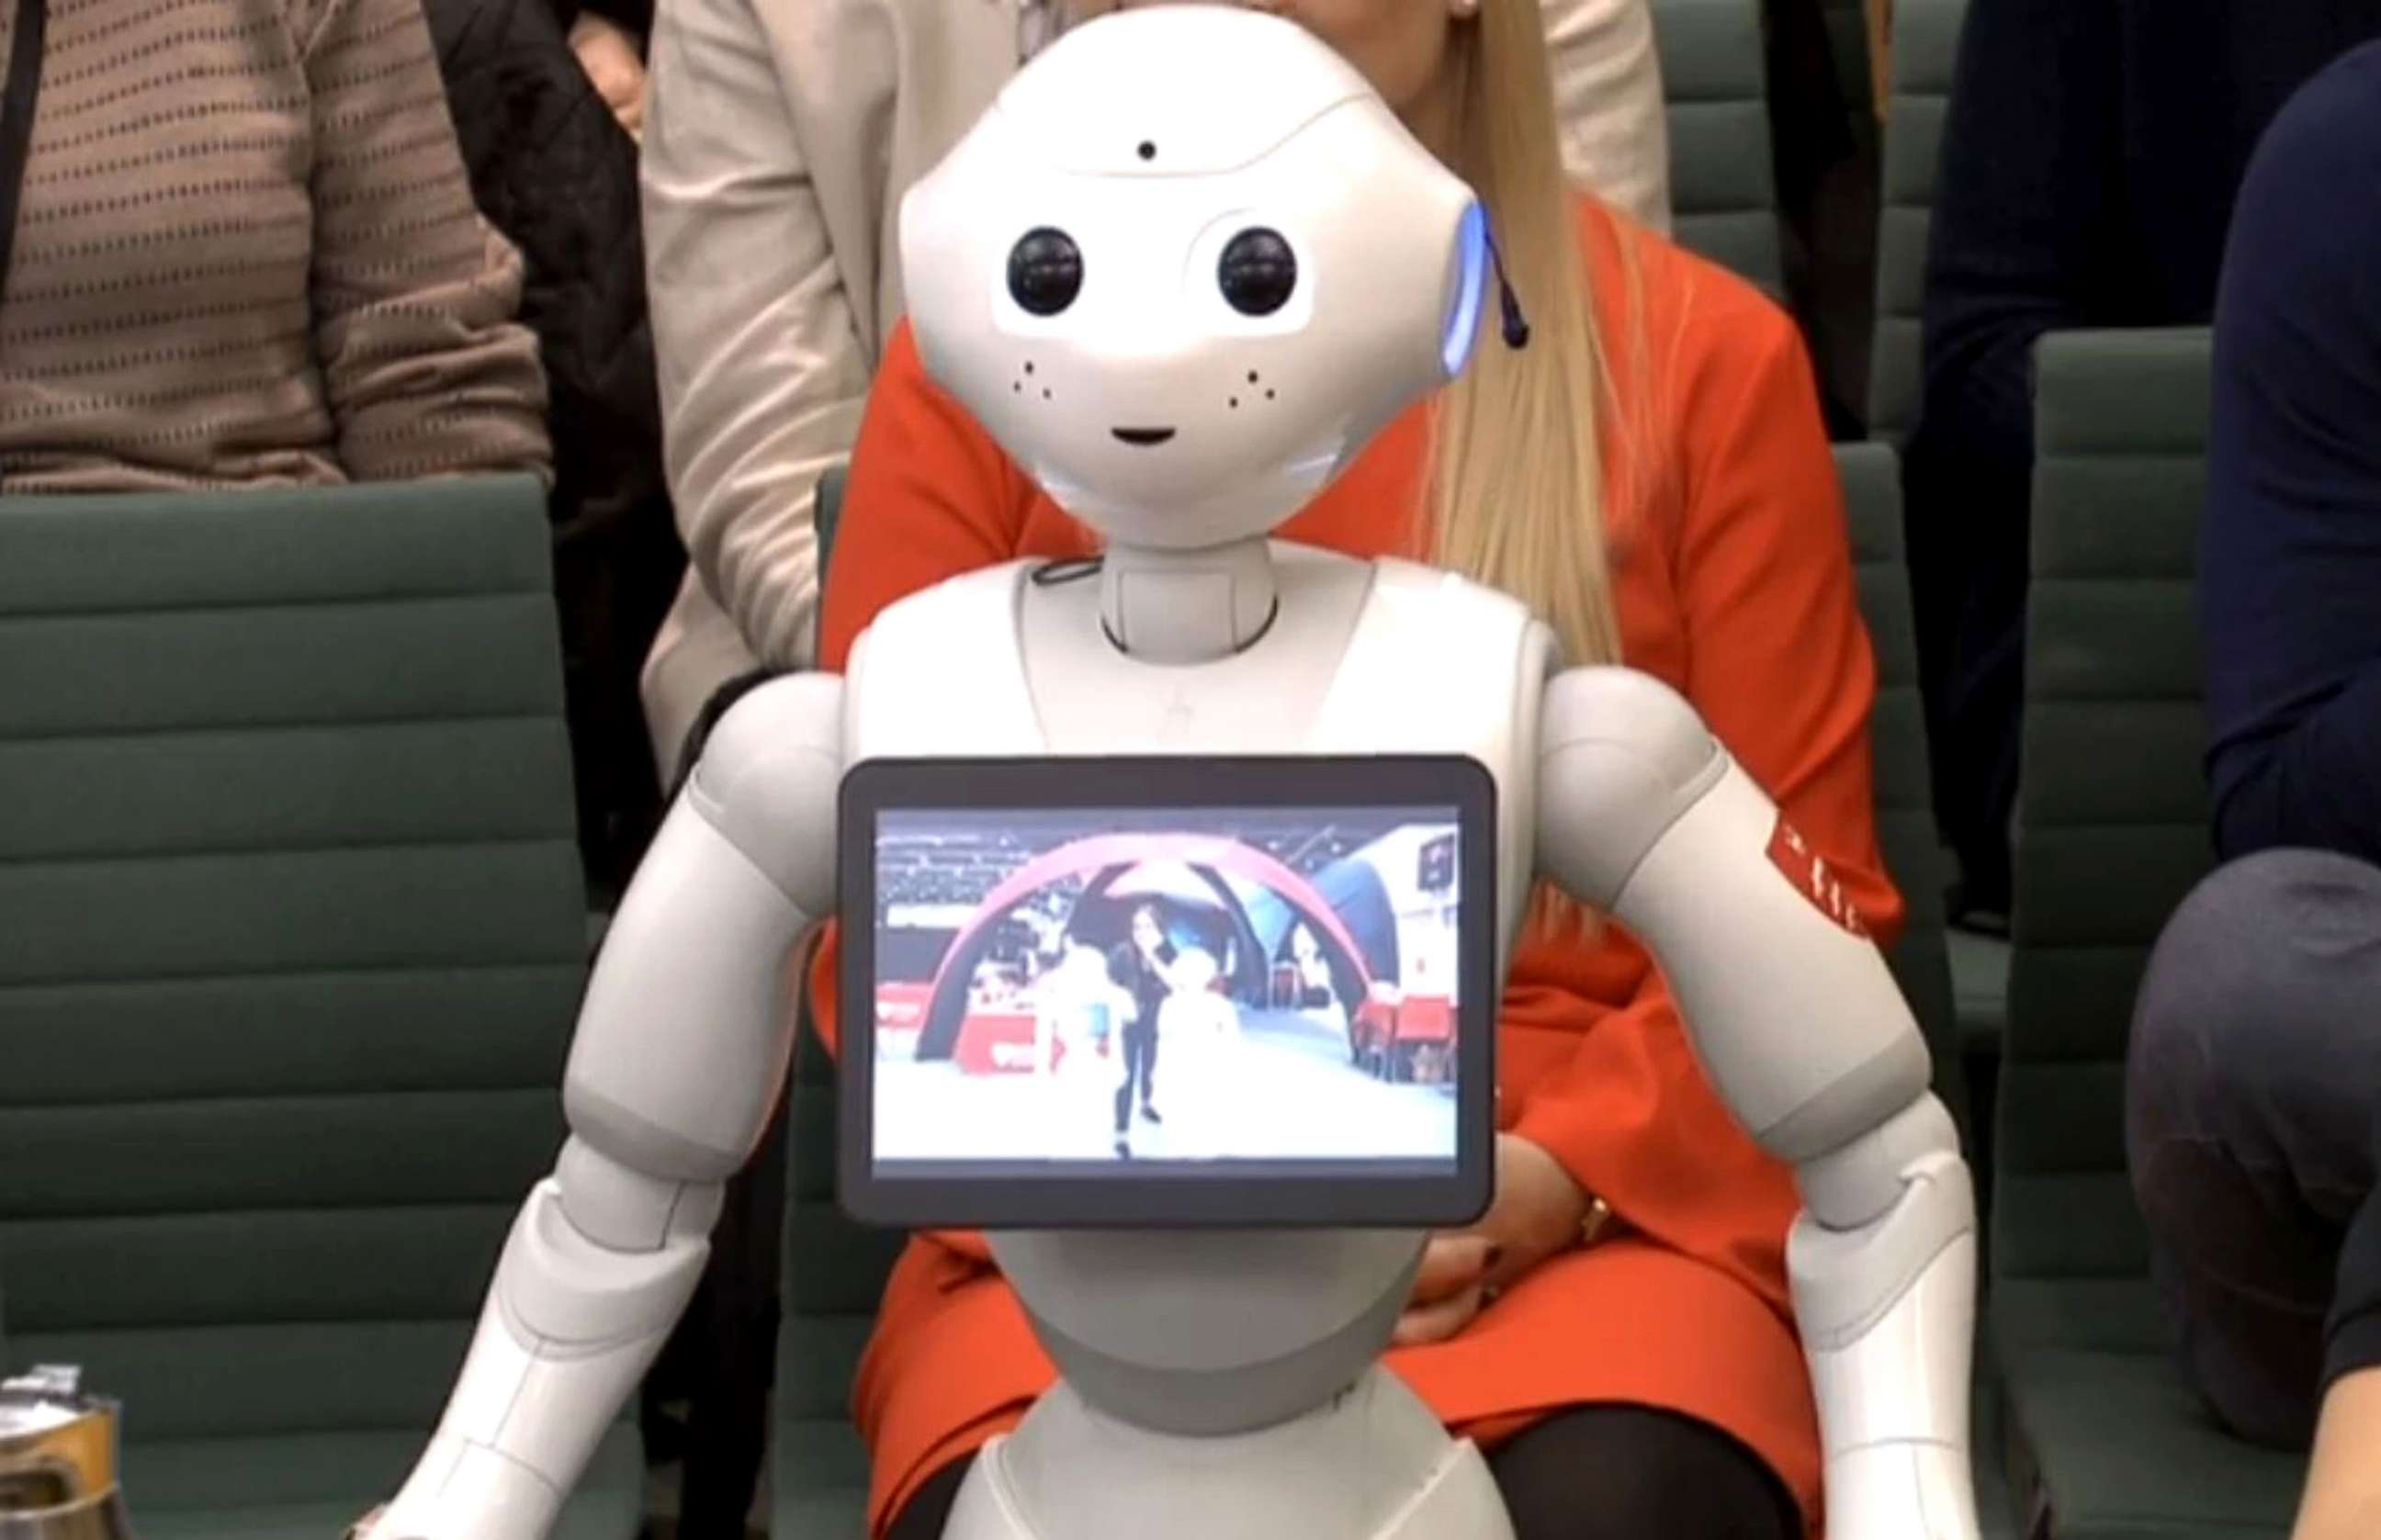 PHOTO: Video still of Pepper the robot, appearing before a select committee for the first time, to answer questions about the fourth industrial revolution in London, Oct. 16, 2018.